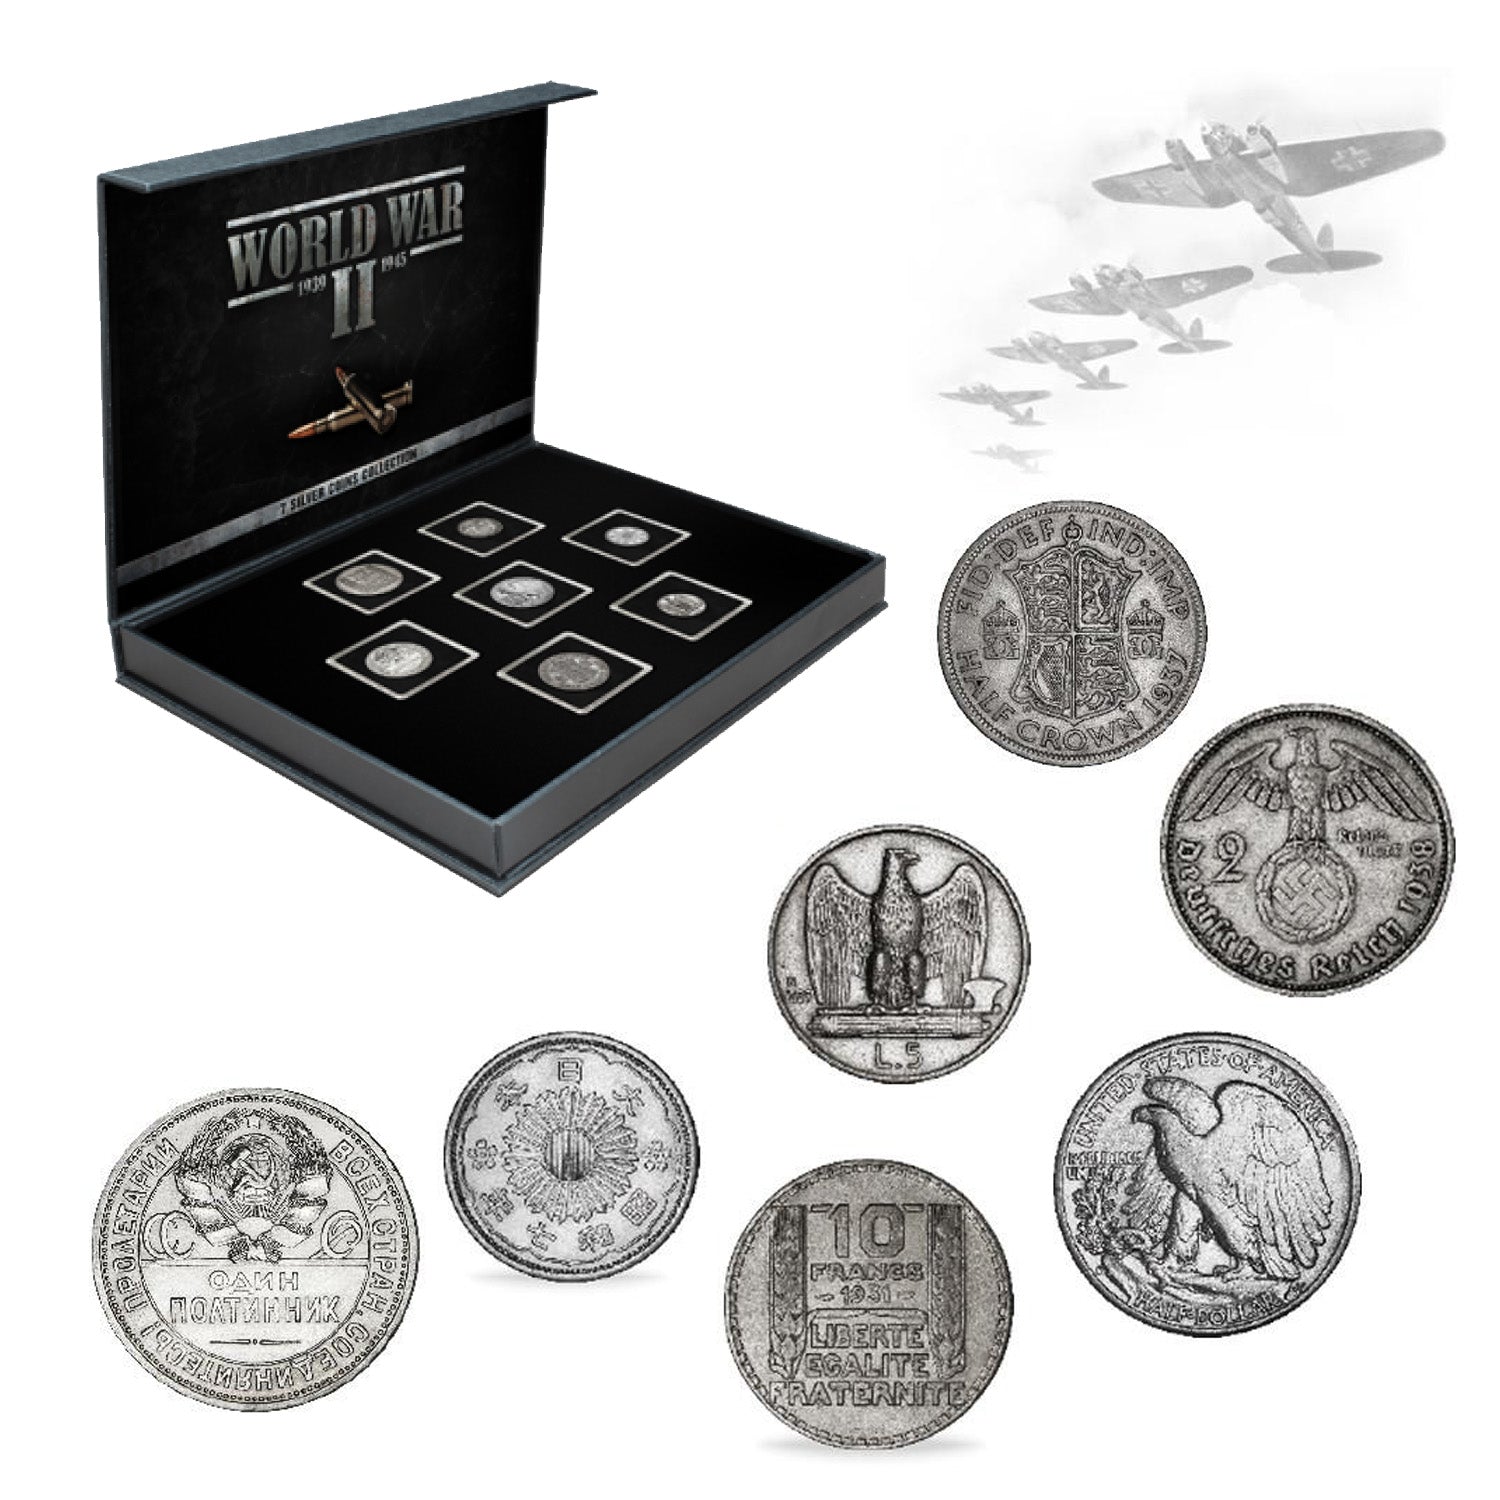 Sales for Greatest Generation Commemorative Coins Feb. 29 | U.S. Mint